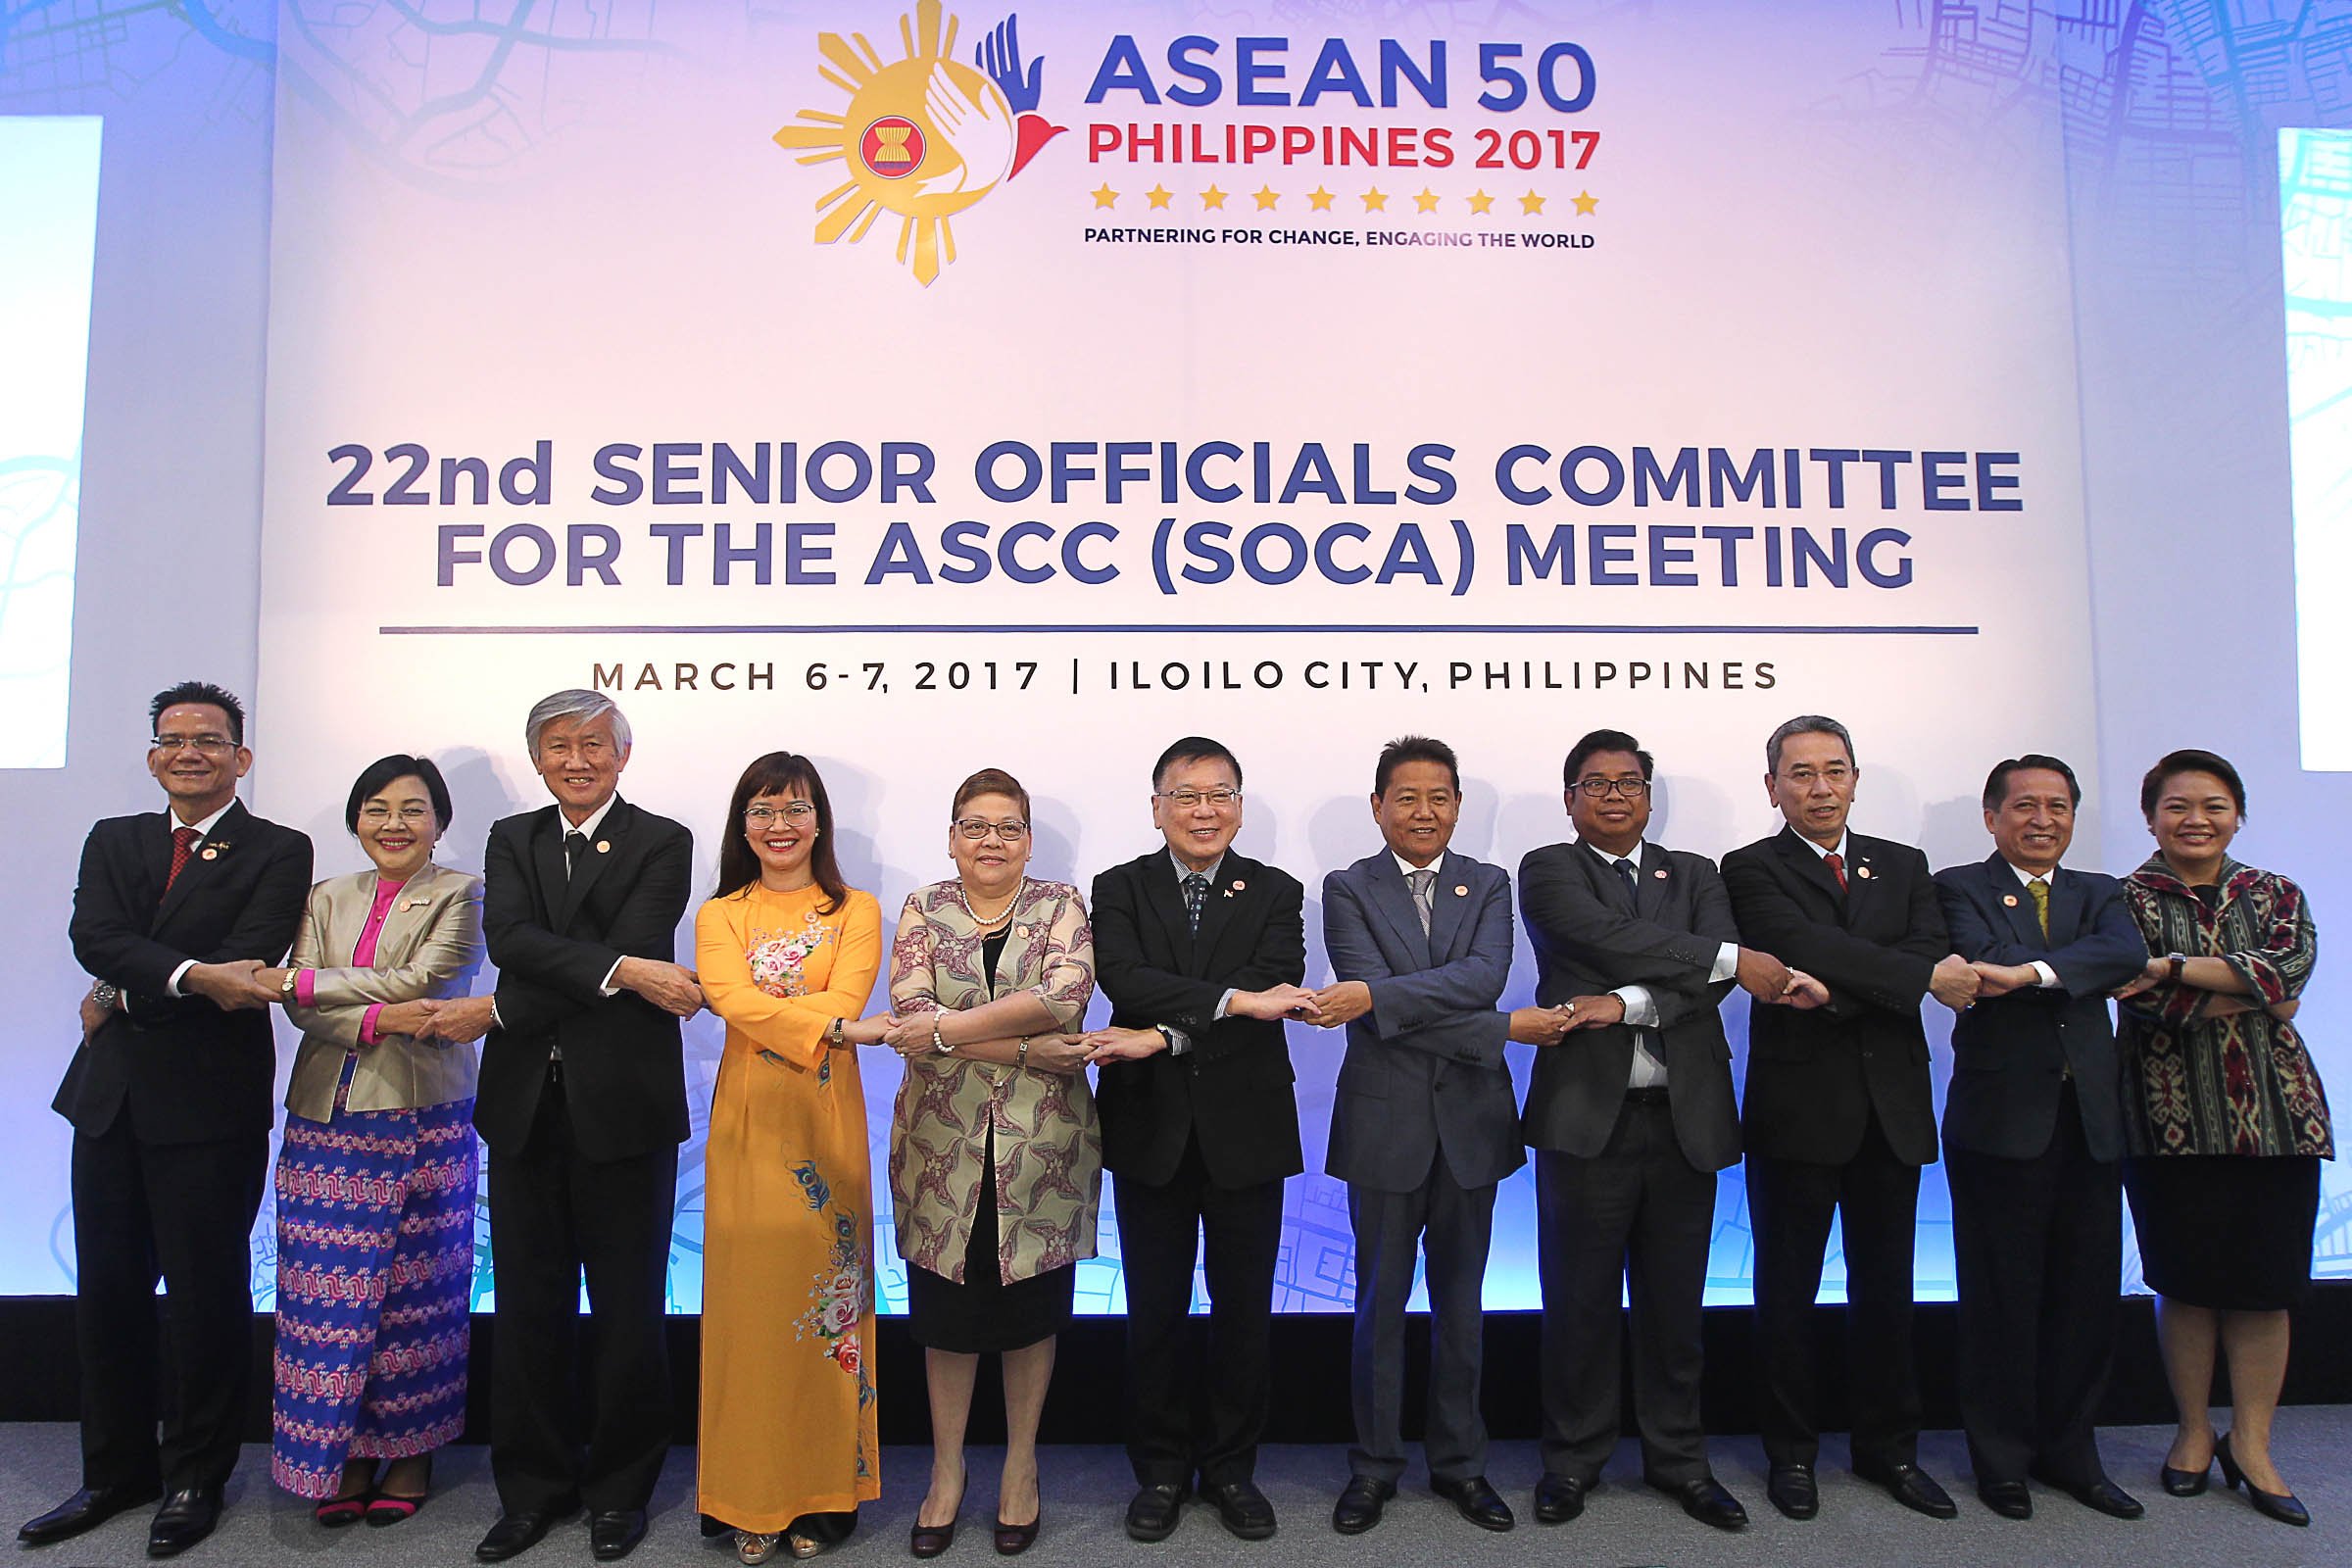 22nd Senior Officials Committee for the ASCC (SOCA) Meeting kicks off